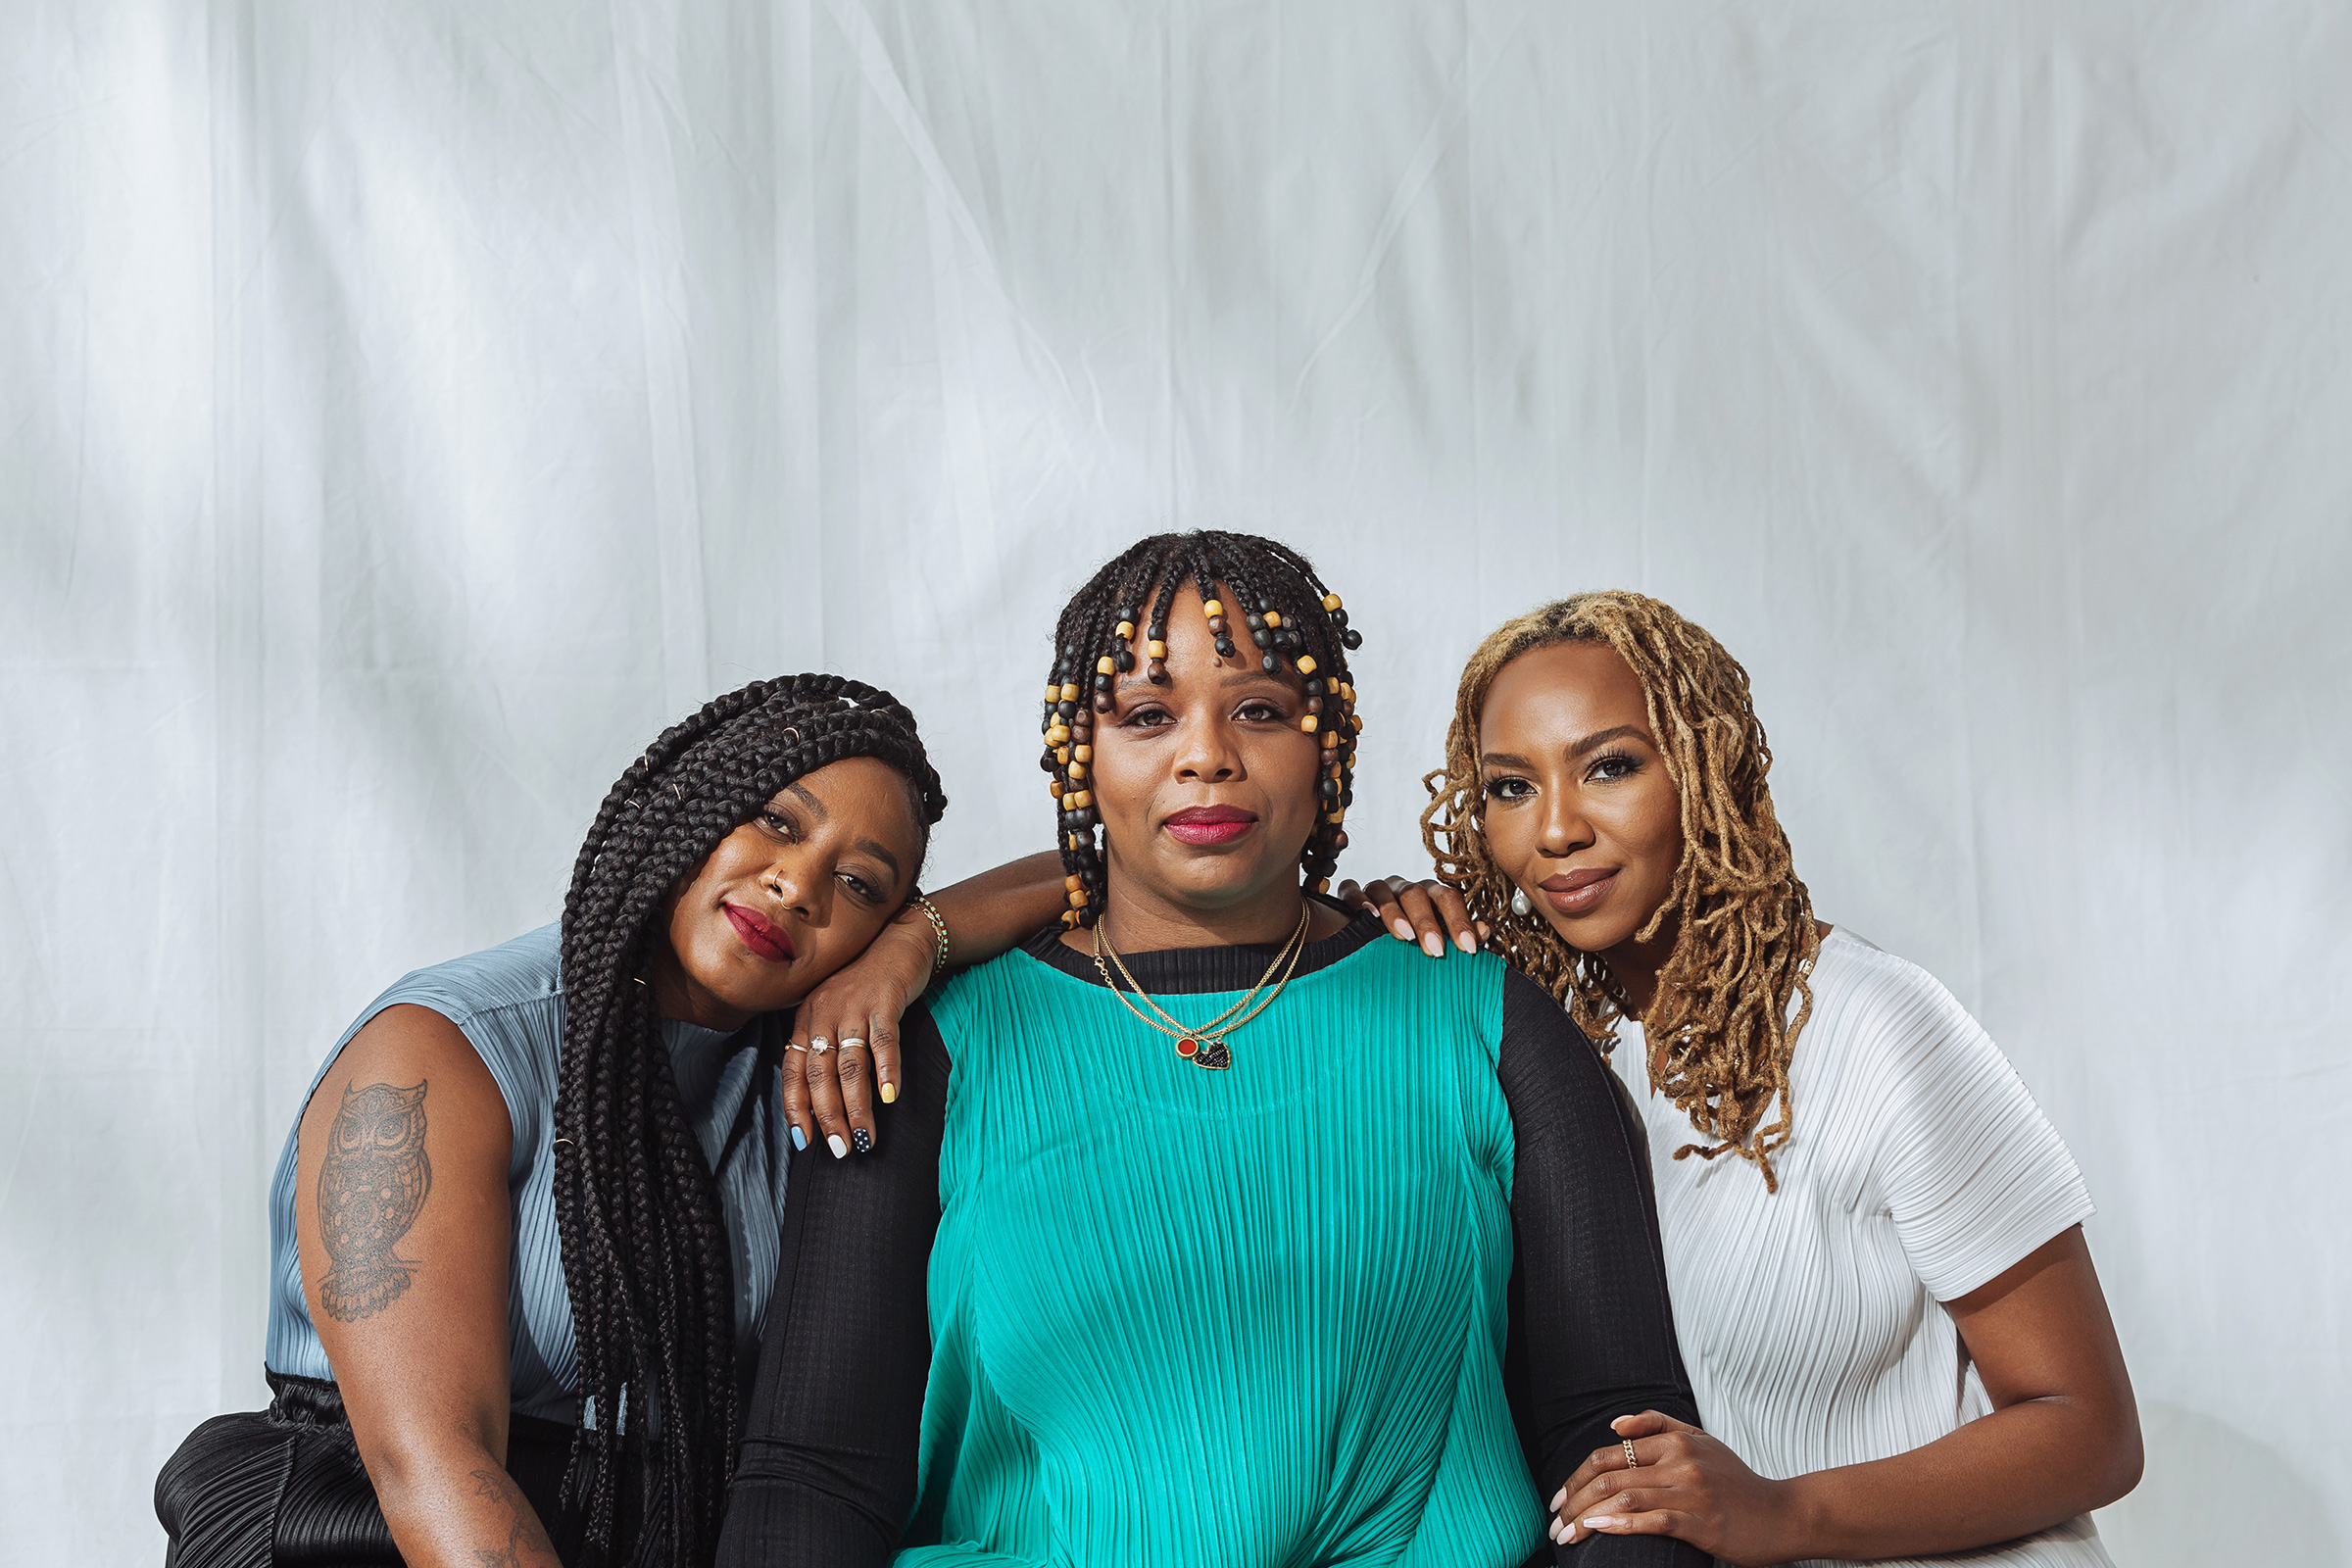 <strong>Alicia Garza, Patrisse Cullors and Opal Tometi</strong>, founders of Black Lives Matter. "<a href="https://time.com/collection/100-most-influential-people-2020/5888228/black-lives-matter-founders/">TIME 100 Most Influential People</a>," Oct. 5 issue. (Kayla Reefer for TIME)